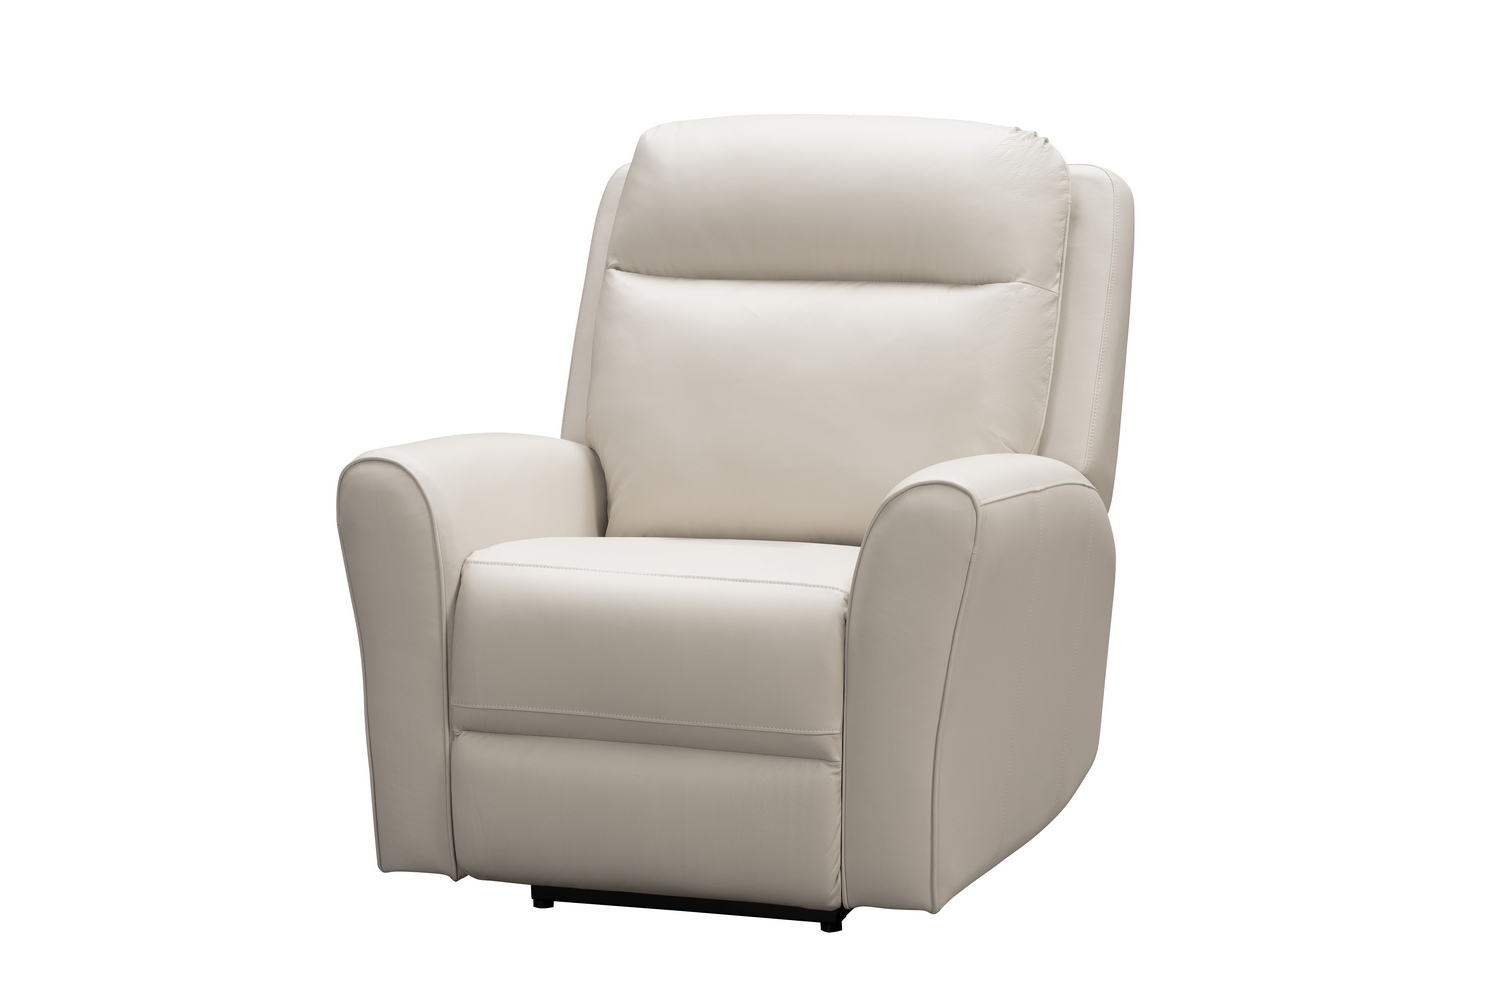 Barcalounger Kelsey Big and Tall Power Recliner Chair with Power Head Rest and Lumbar - Laurel Cream/Leather Match